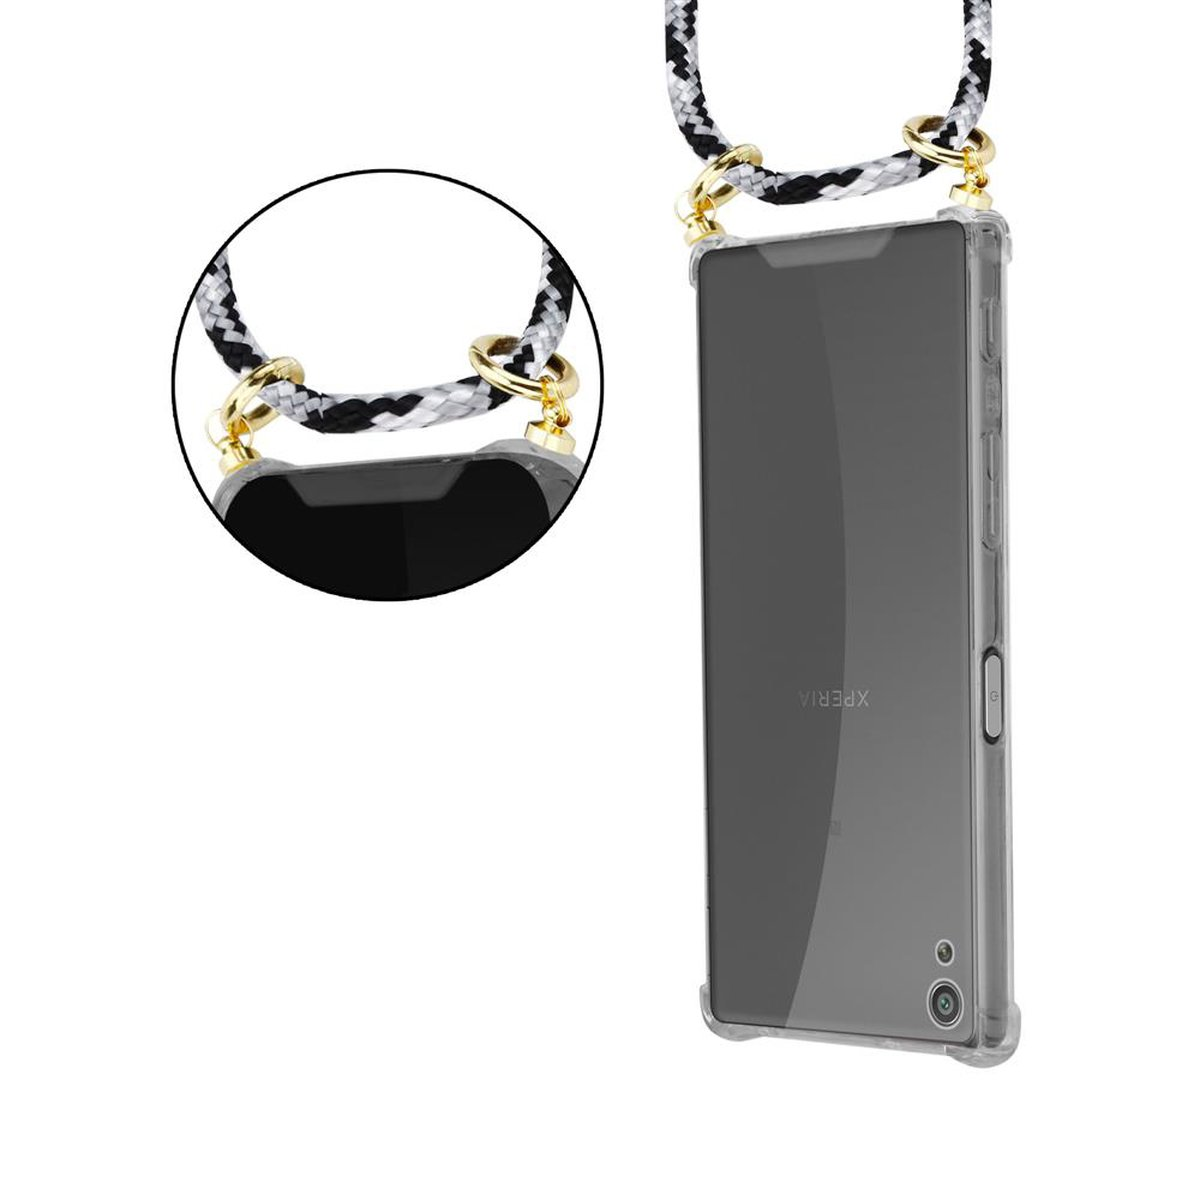 Sony, Kette Kordel abnehmbarer Band SCHWARZ XA, Hülle, Handy CADORABO Gold Backcover, mit Xperia CAMOUFLAGE und Ringen,